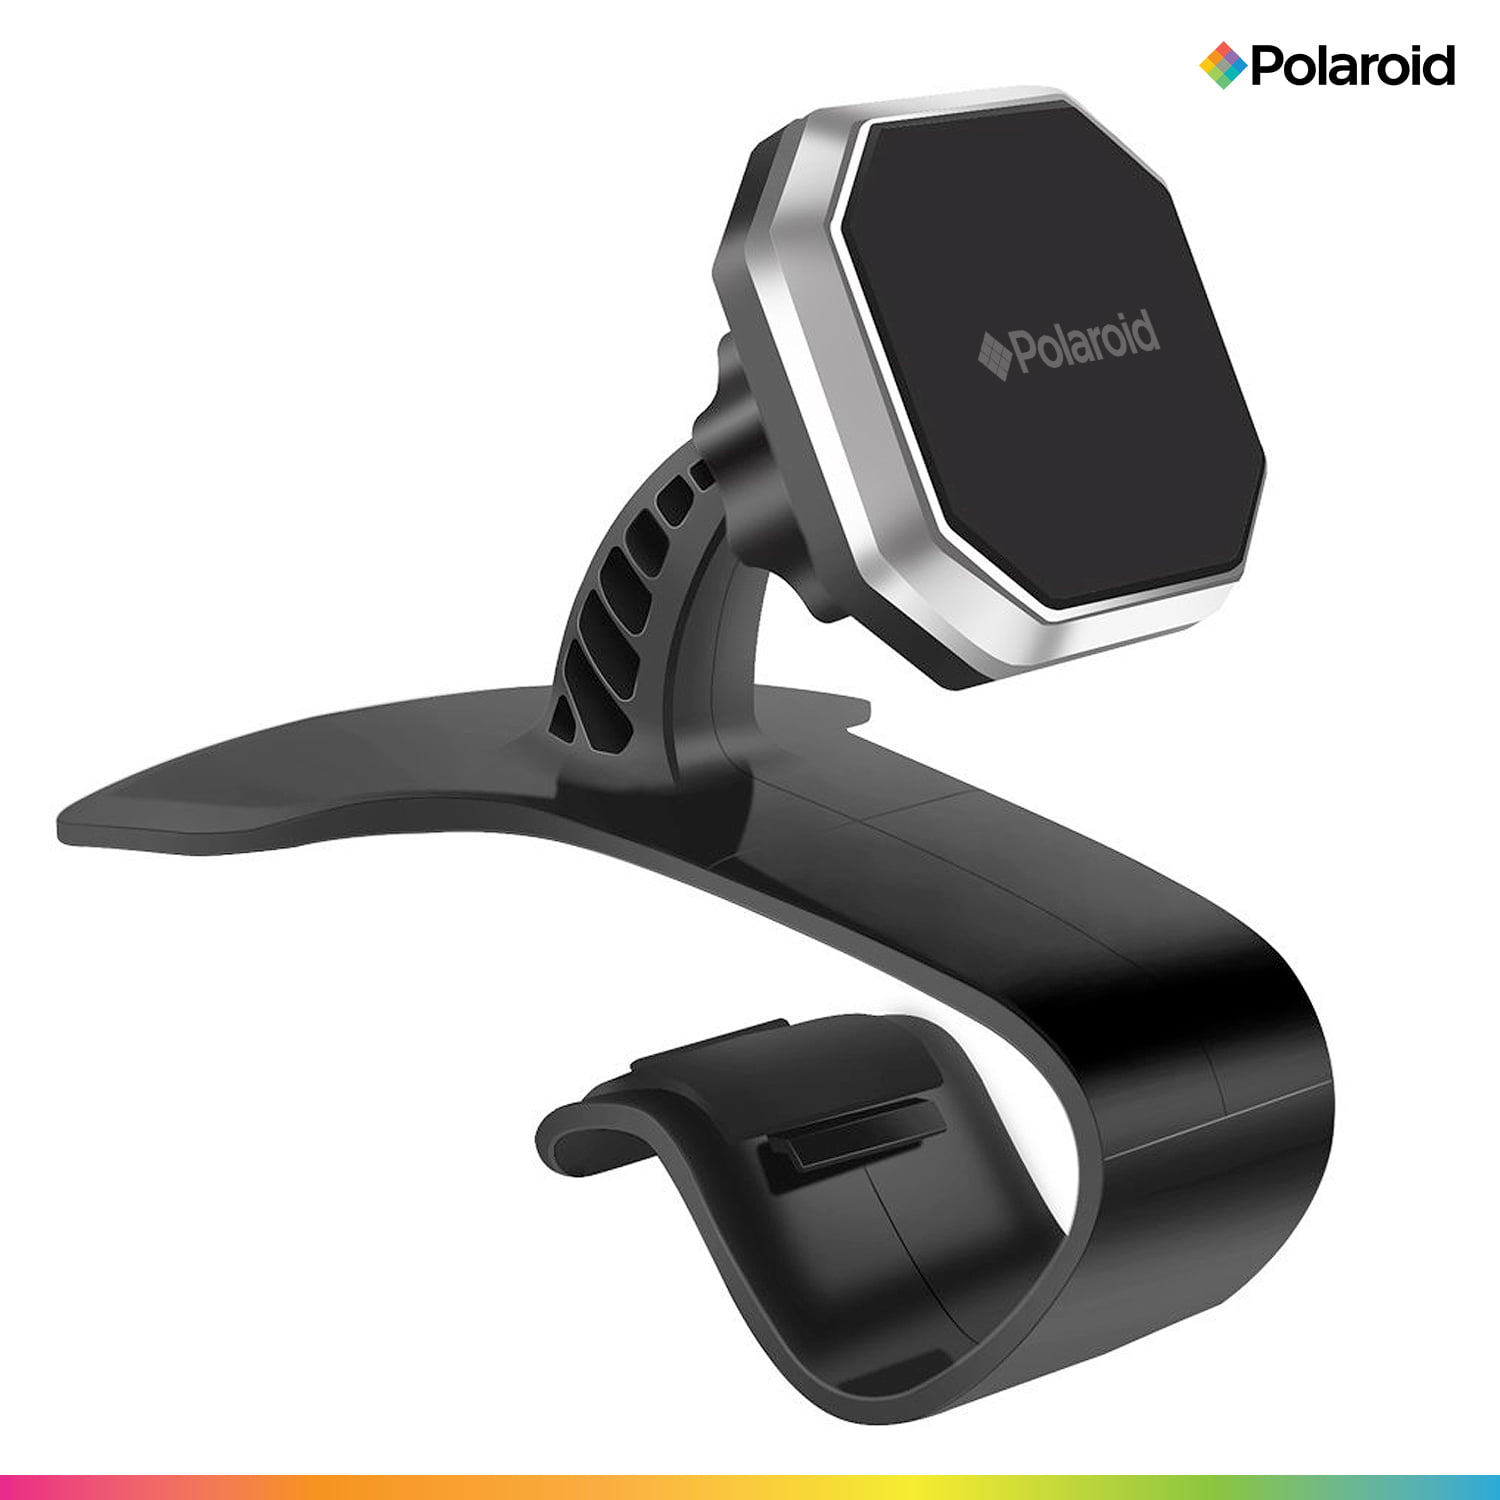 S8/S8 Plus Extra Strength Magnetic Car Dashboard Mount with 360 Rotation for Samsung Galaxy S9/S9 Plus Cellet Magnetic Dashboard Mount Galaxy Note 9/8/5/4 J7/J3/A6/J7 V/J3 V/J7 Prime and More 